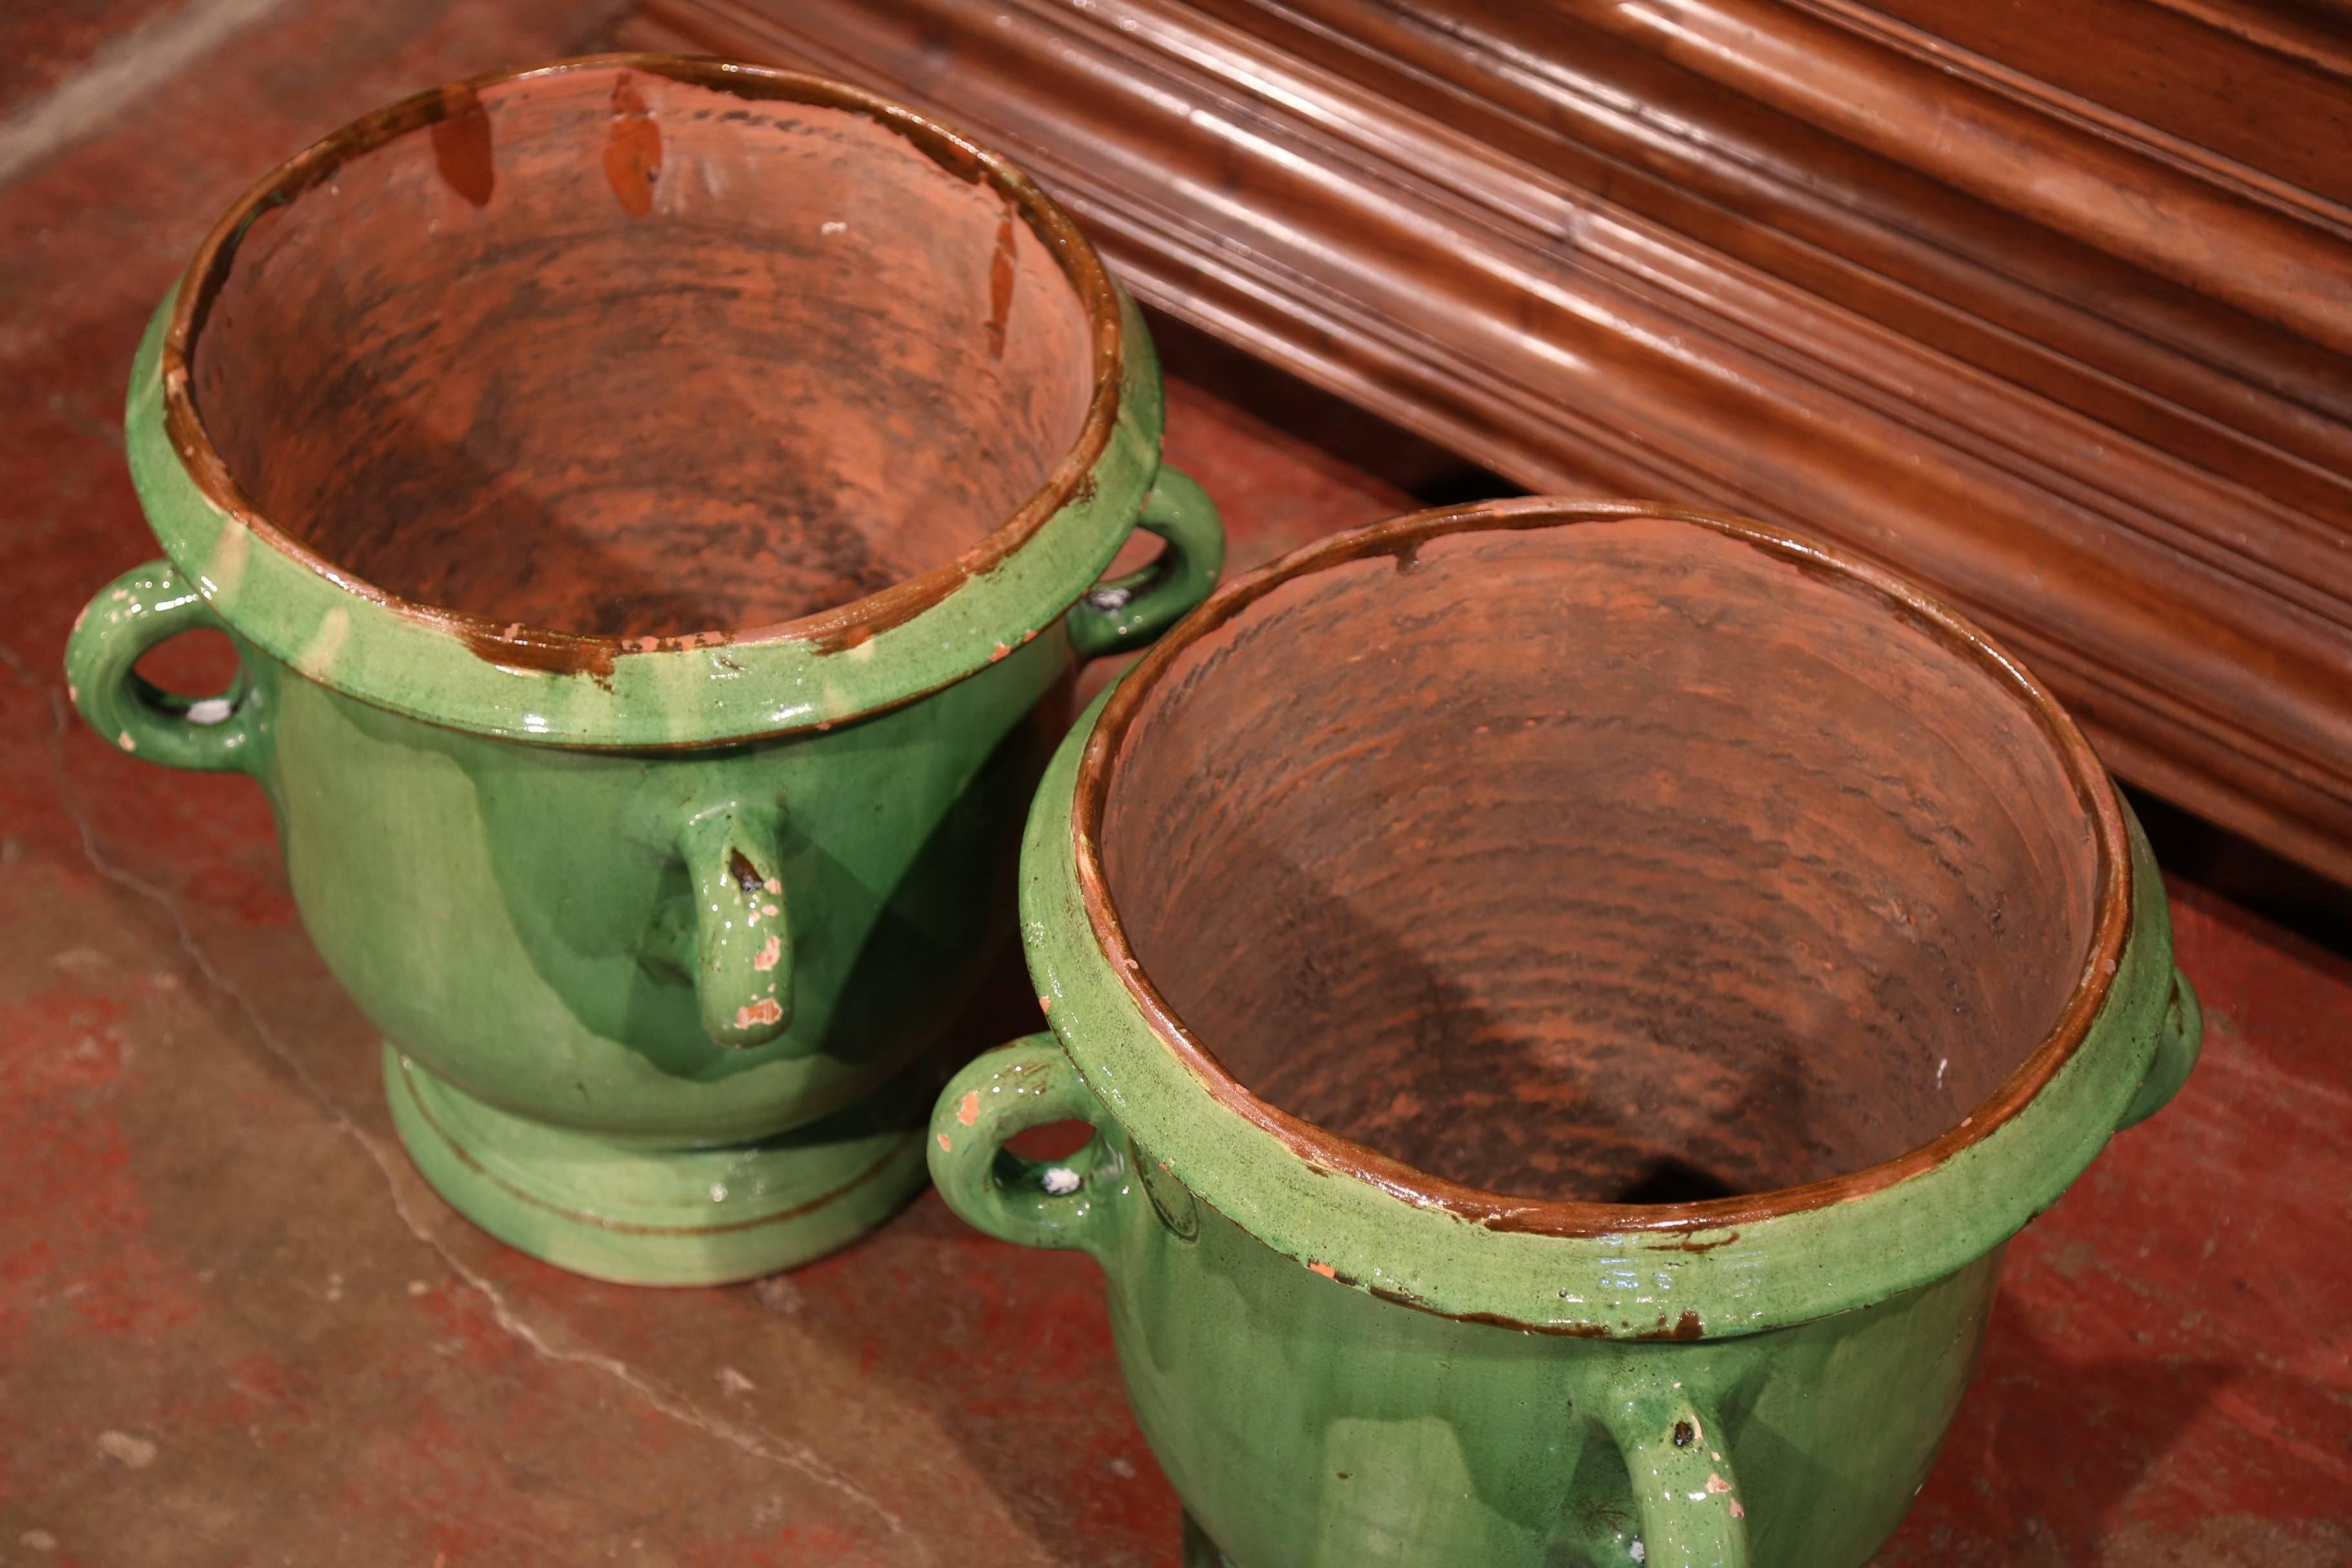 Pair of Mid-20th Century French Glazed Green Planters with Handles from Provence 1